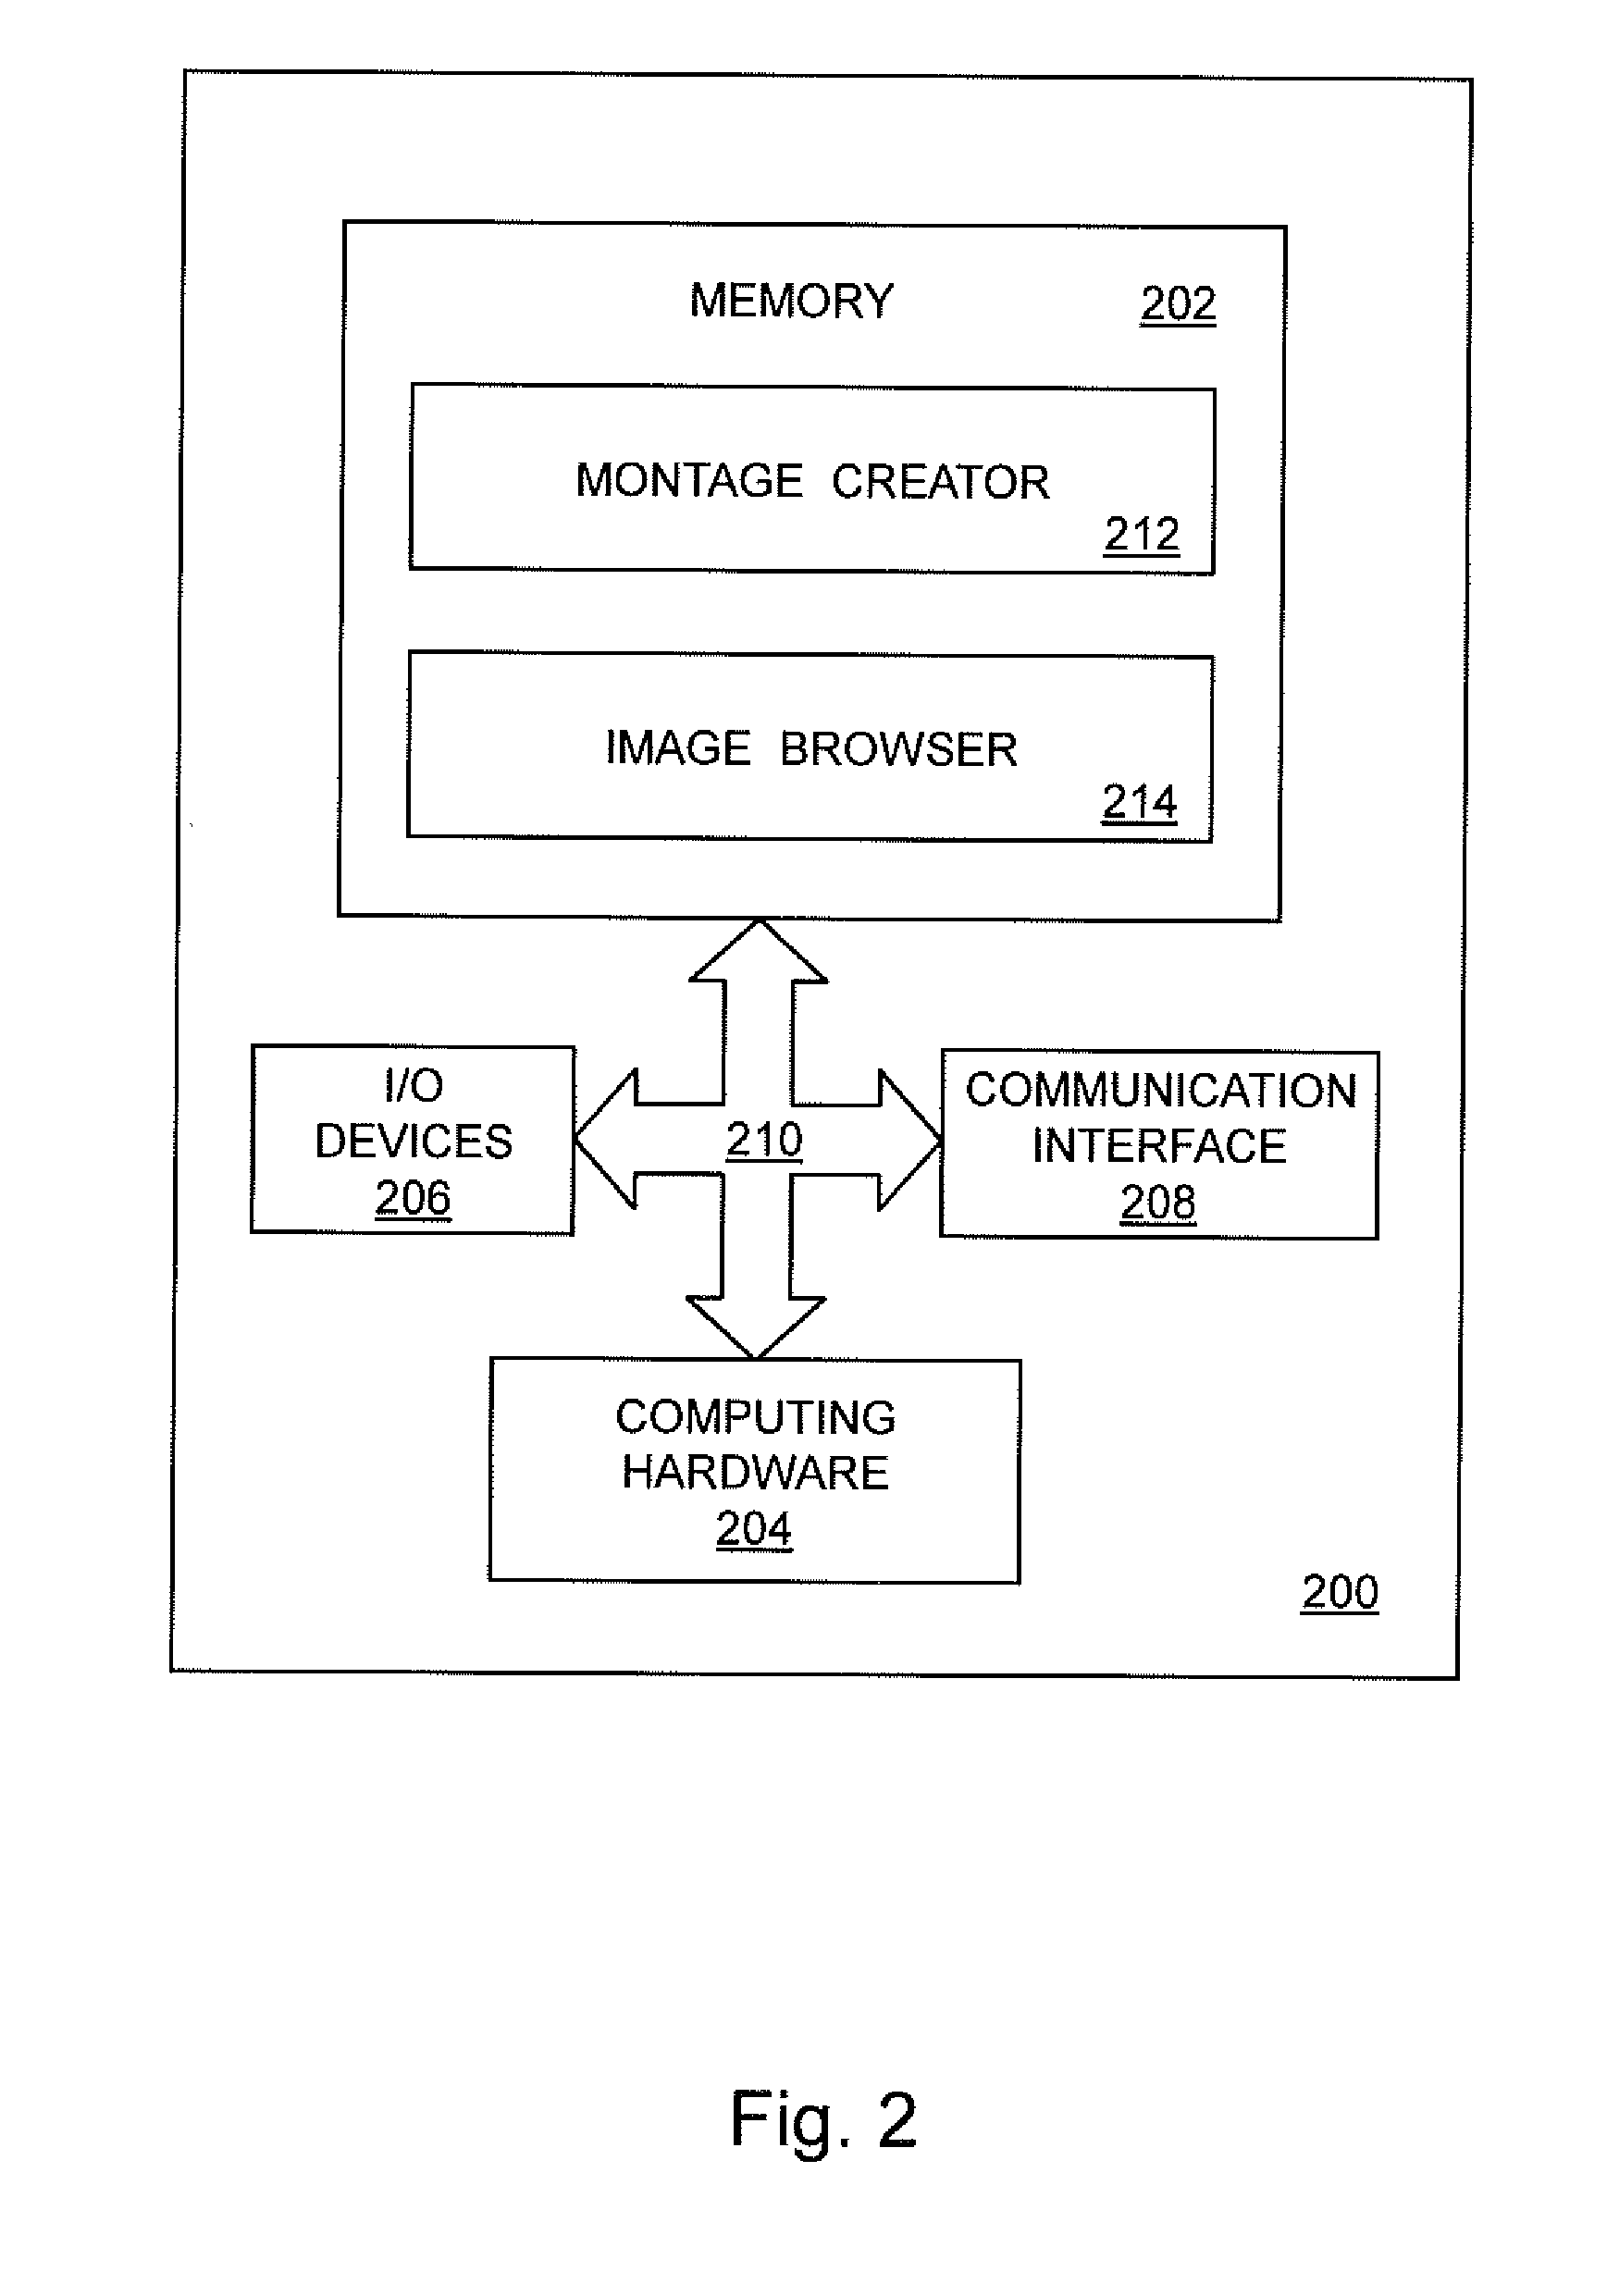 System for processing image data, storing image data and accessing image data